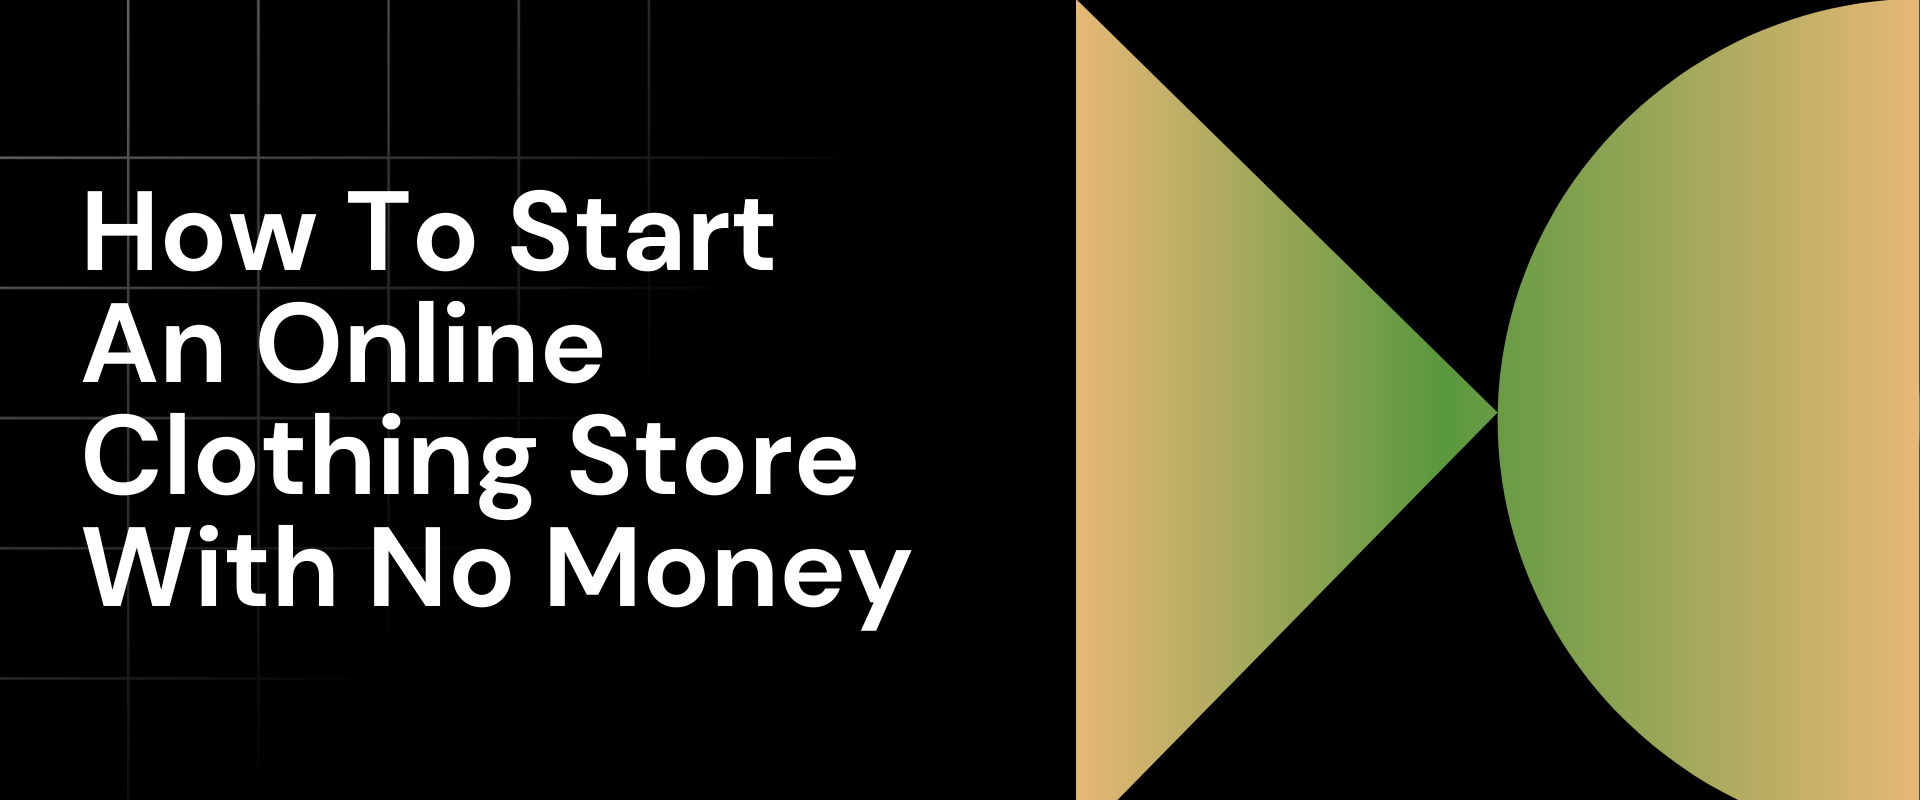 How To Start an Online Clothing Store With No Money in India – 4 Simple Steps